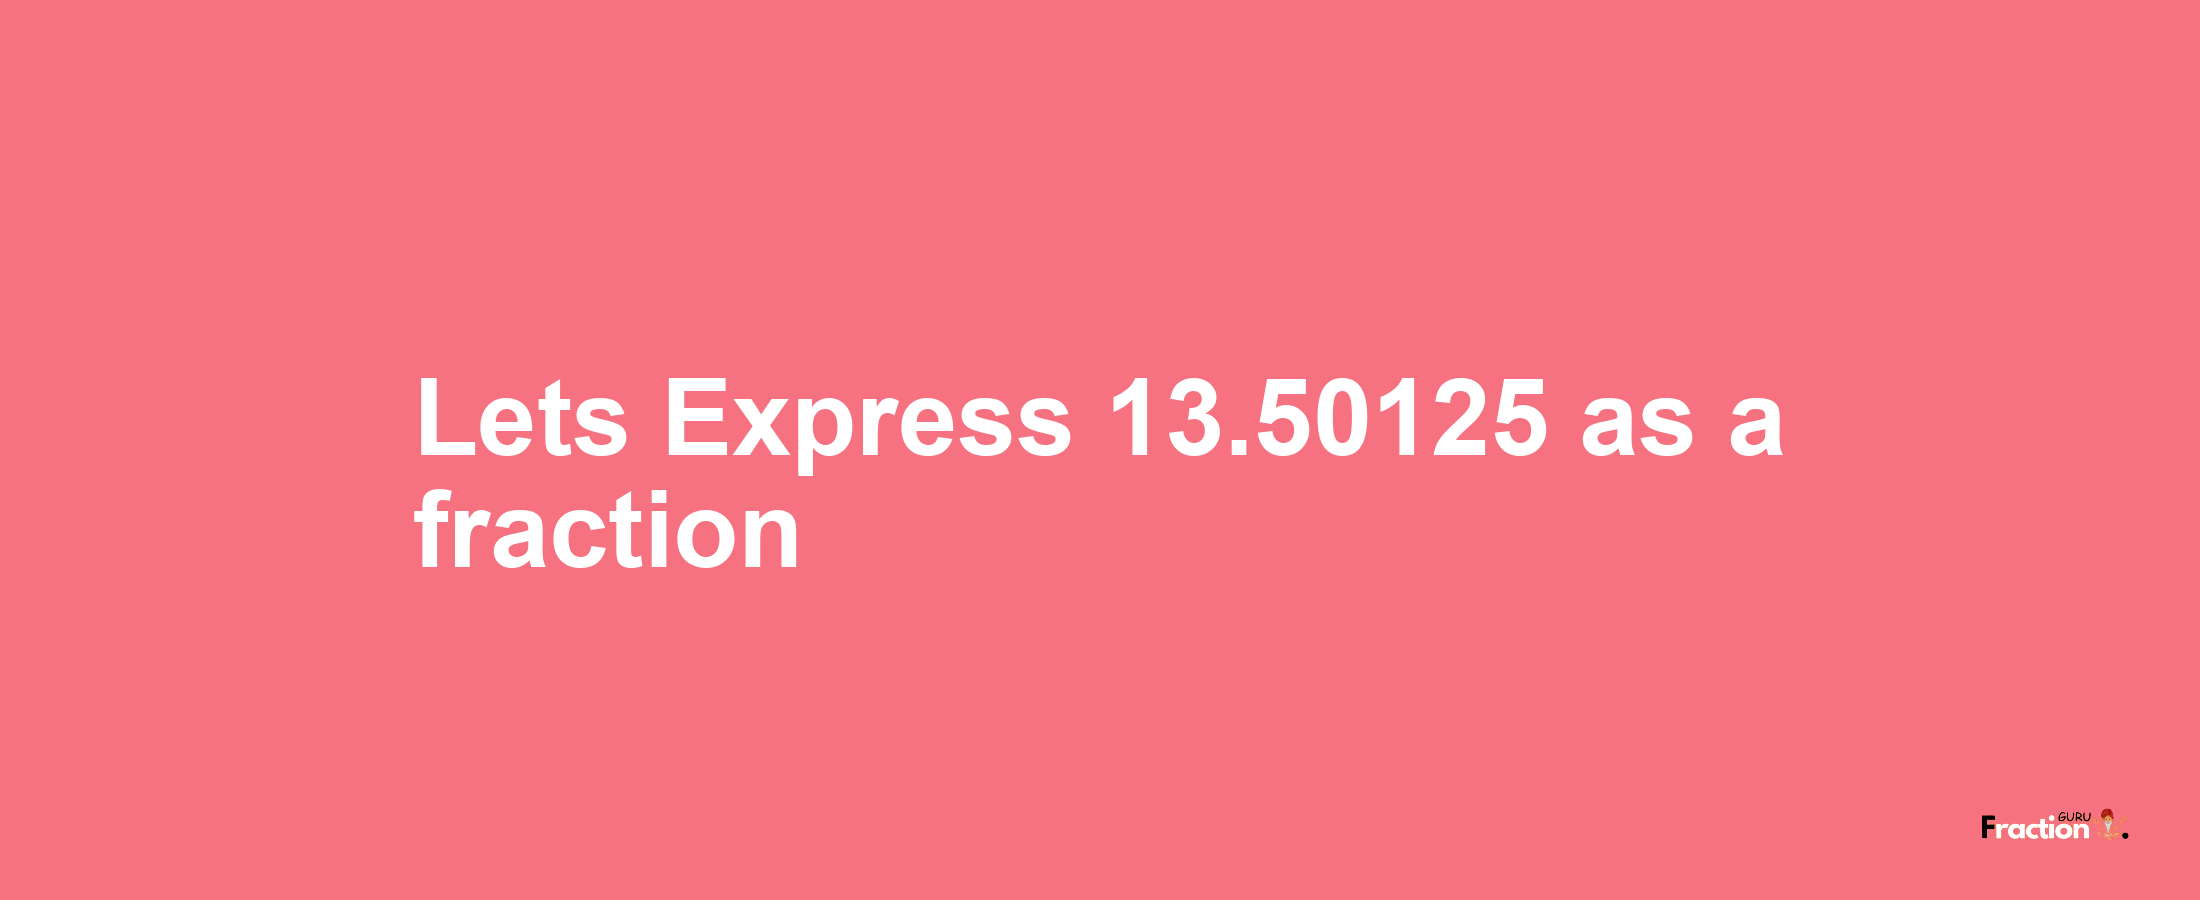 Lets Express 13.50125 as afraction